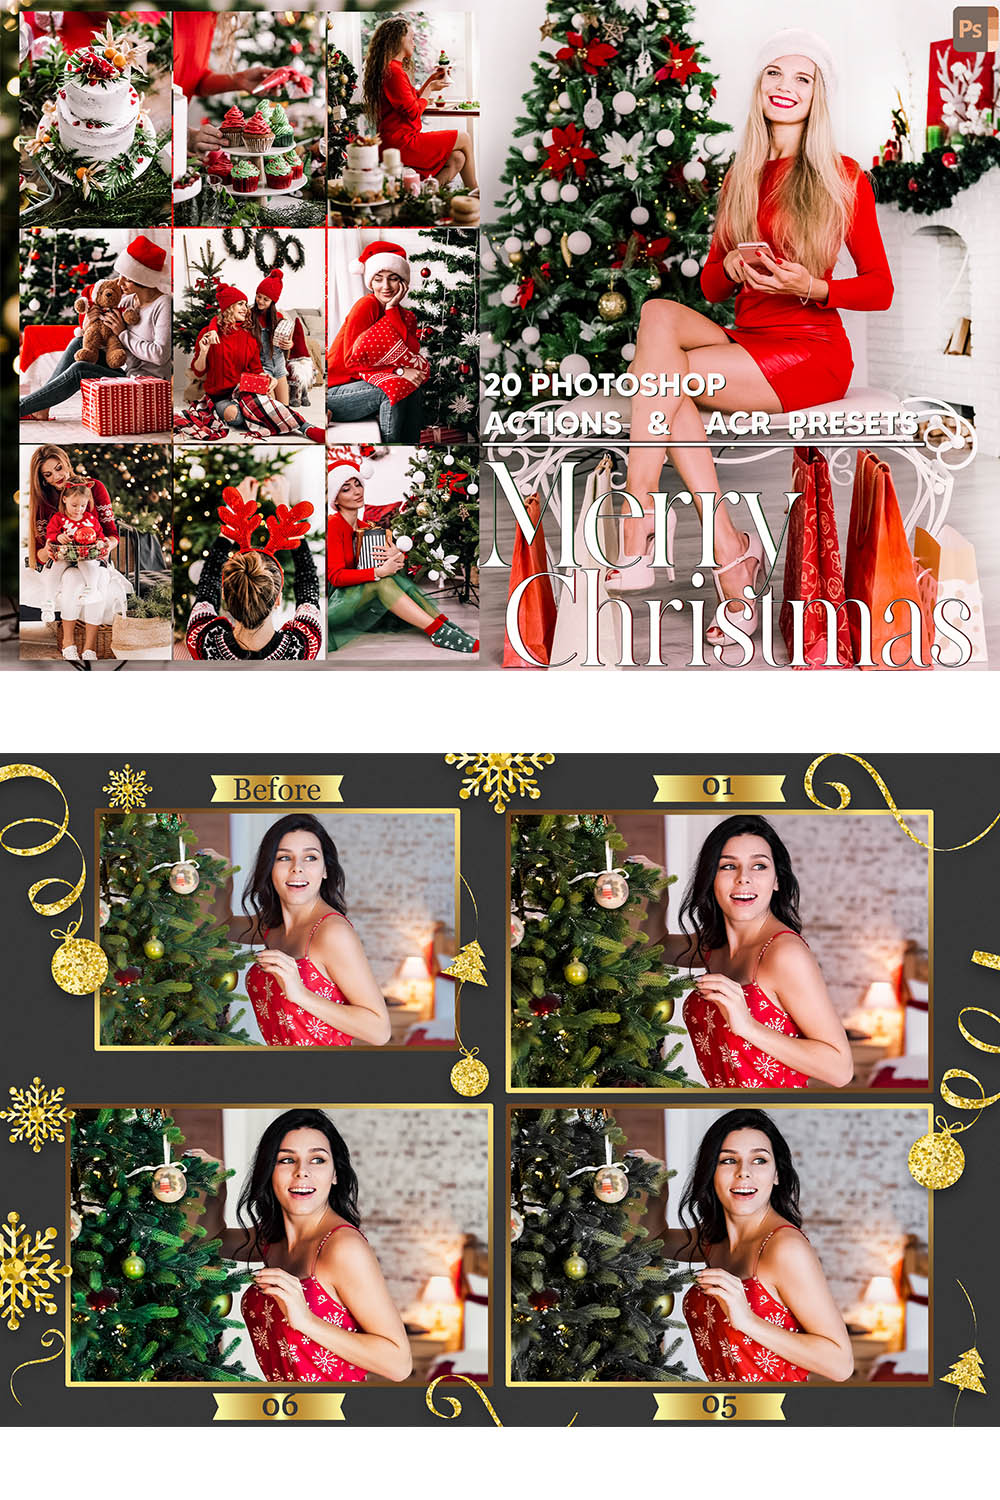 20 Photoshop Actions, Merry Christmas Ps Action, Light ACR Preset, Xmas Ps Filter, Atn Pictures And Style Theme For Instagram, Blogger pinterest preview image.